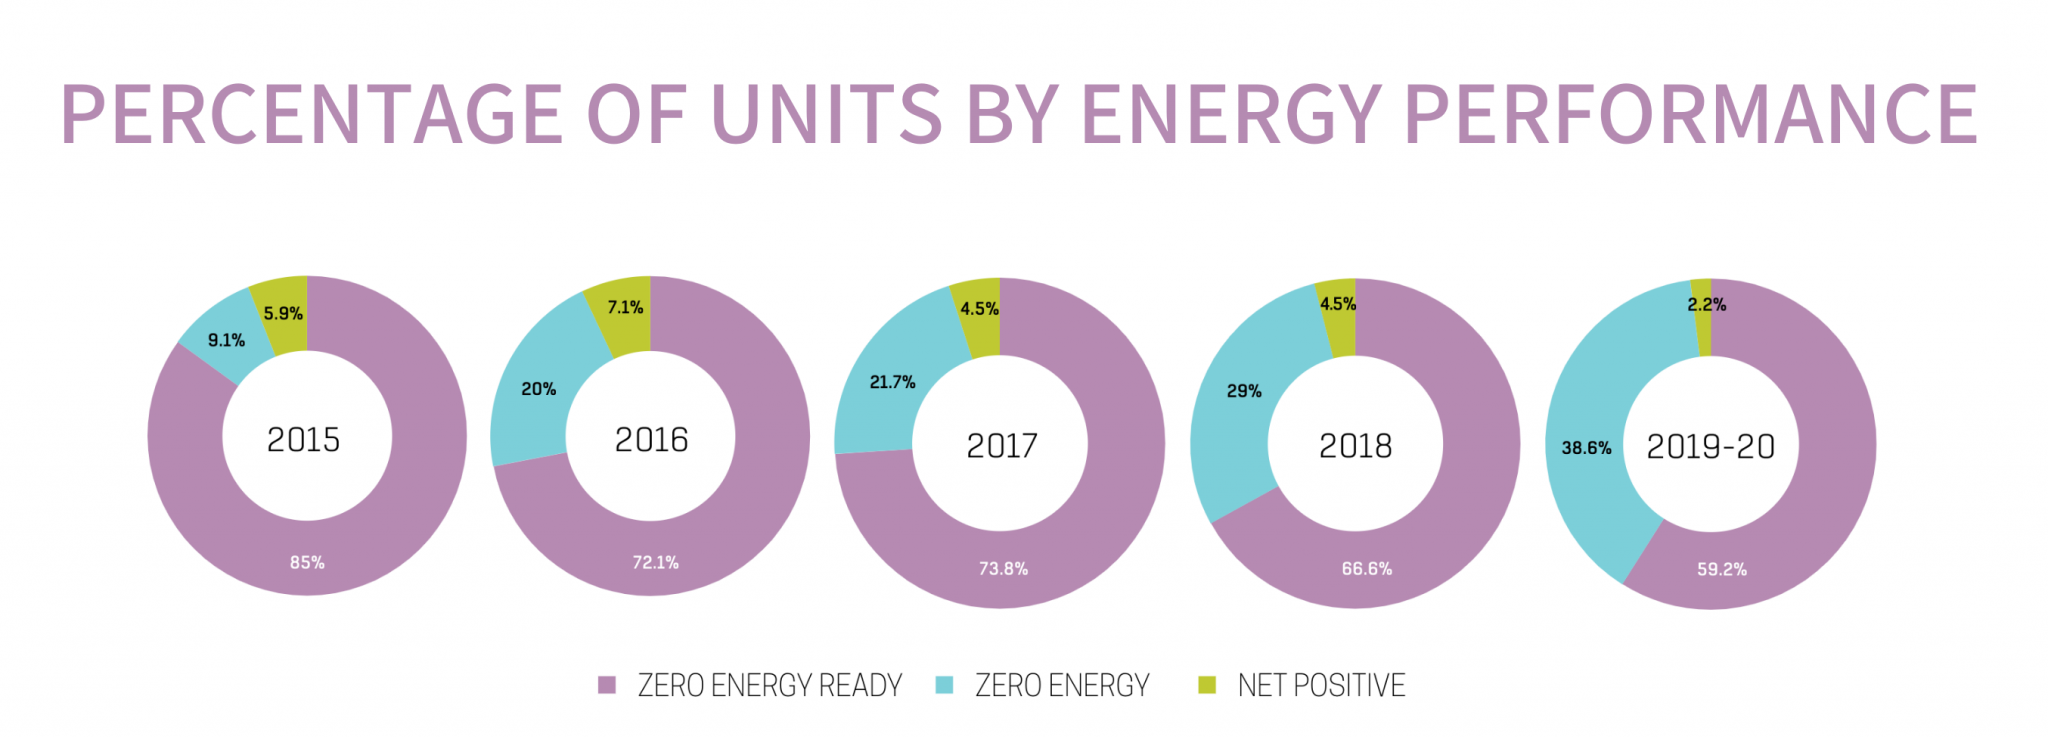 Percentage of Units by Energy Performance